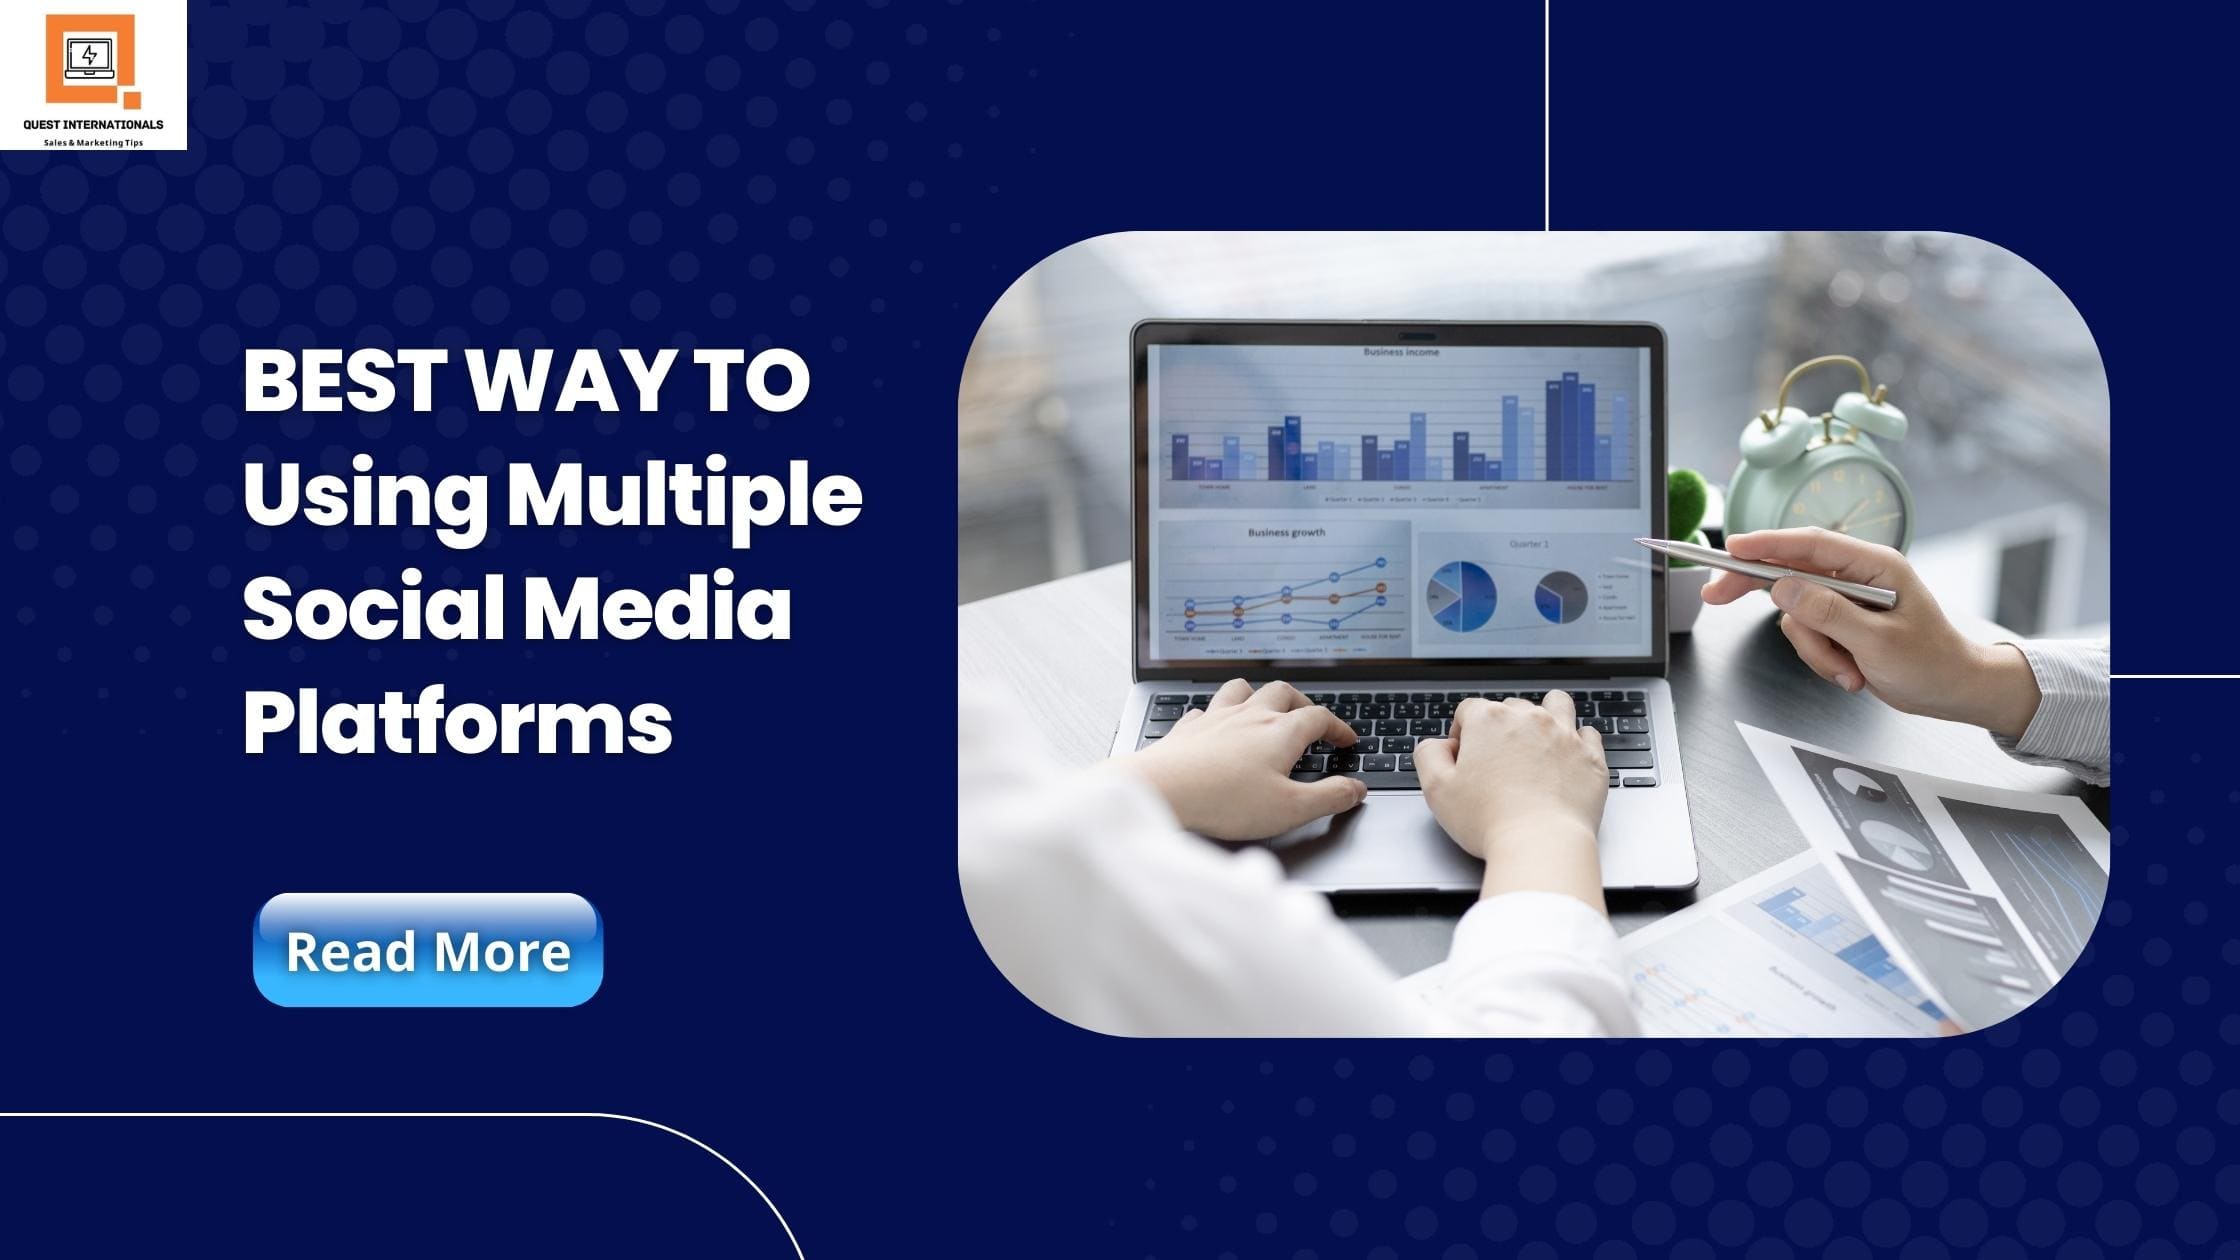 You are currently viewing BEST WAY TO Using Multiple Social Media Platform